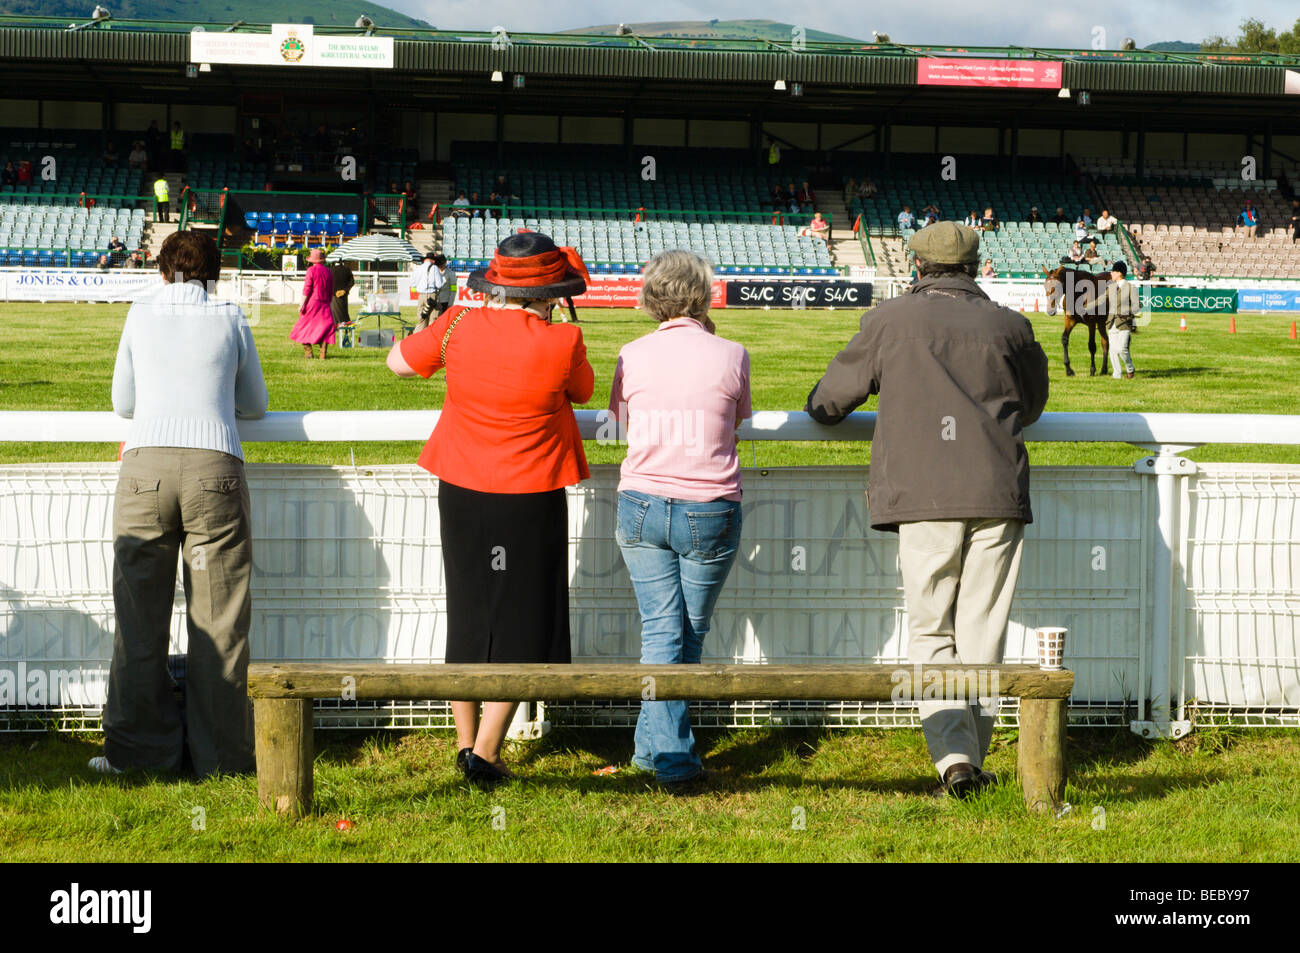 Spectators at the Royal Welsh Show Stock Photo